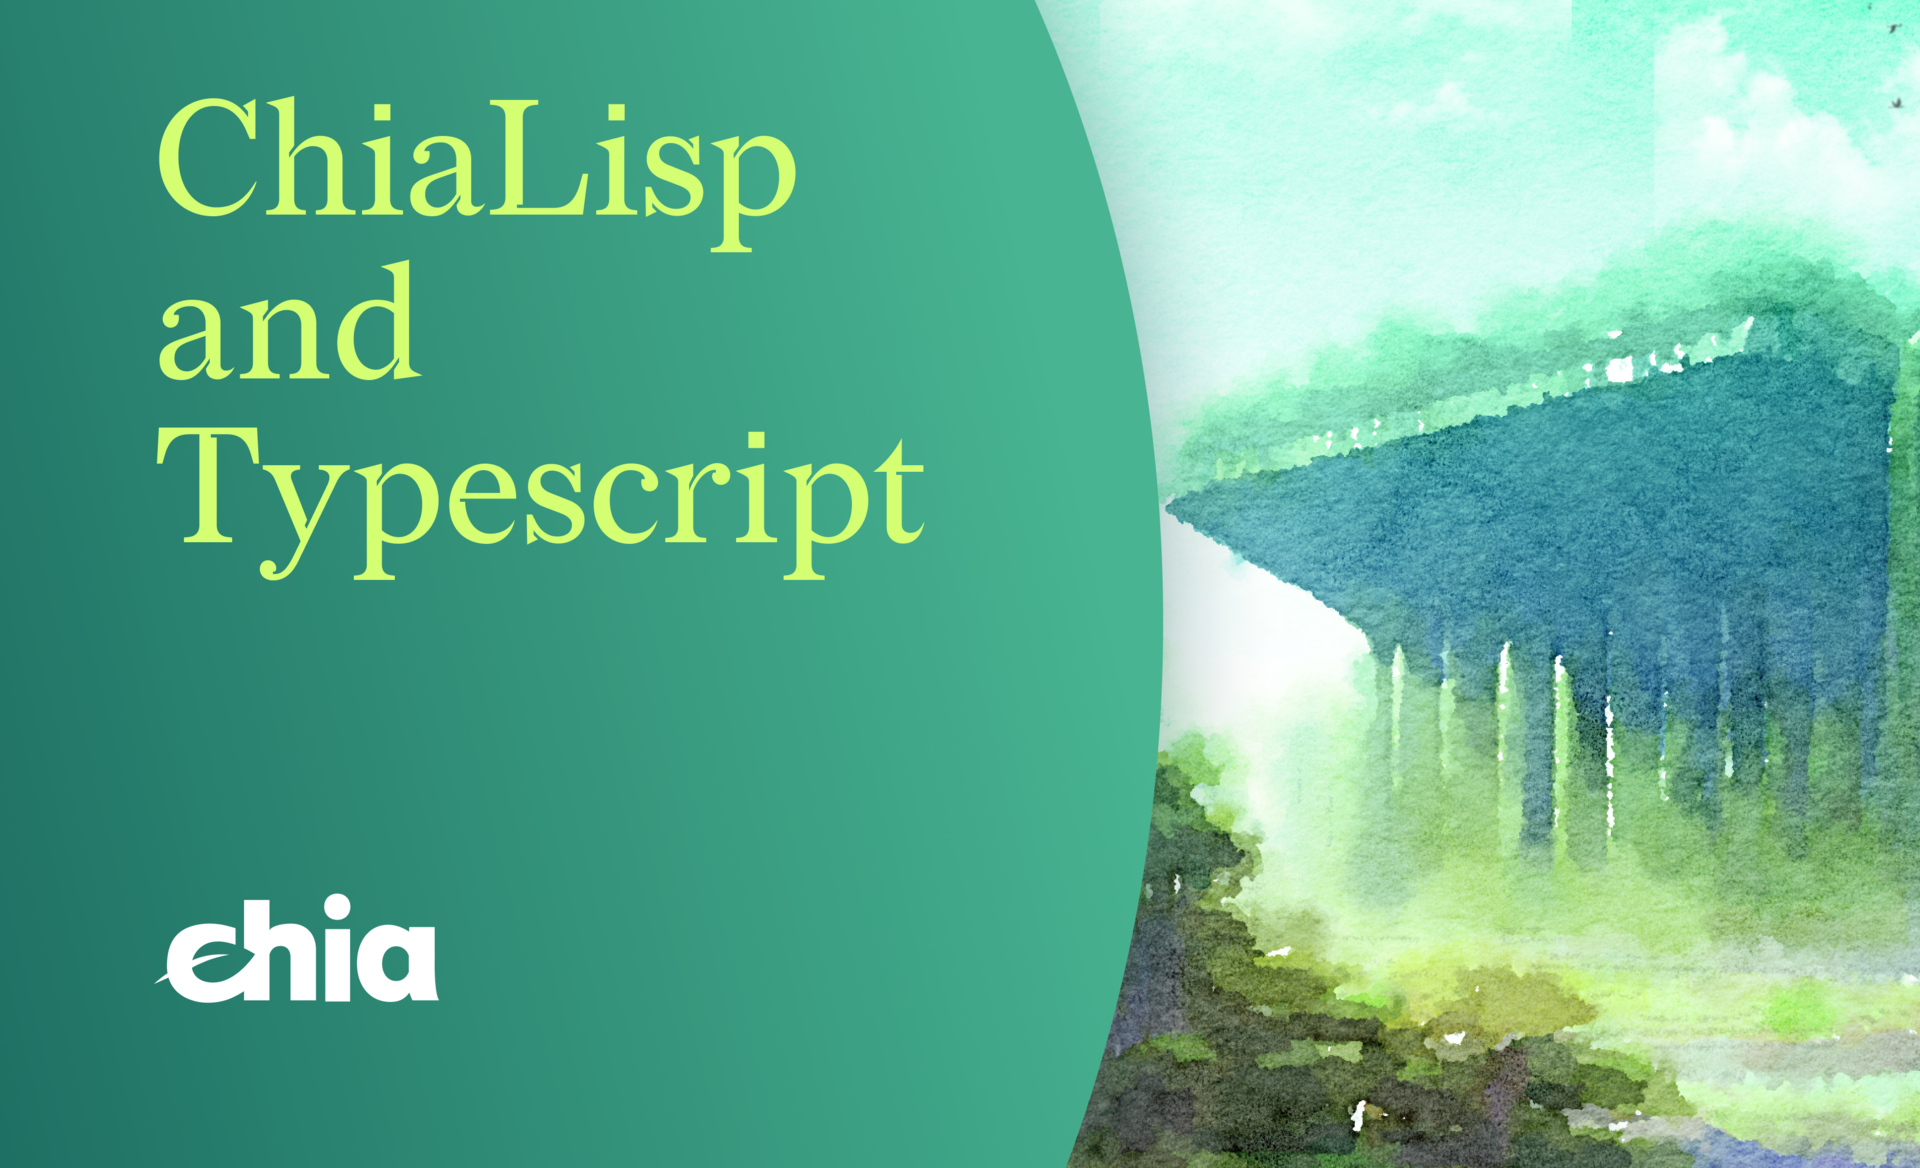 Chialisp and Typescript